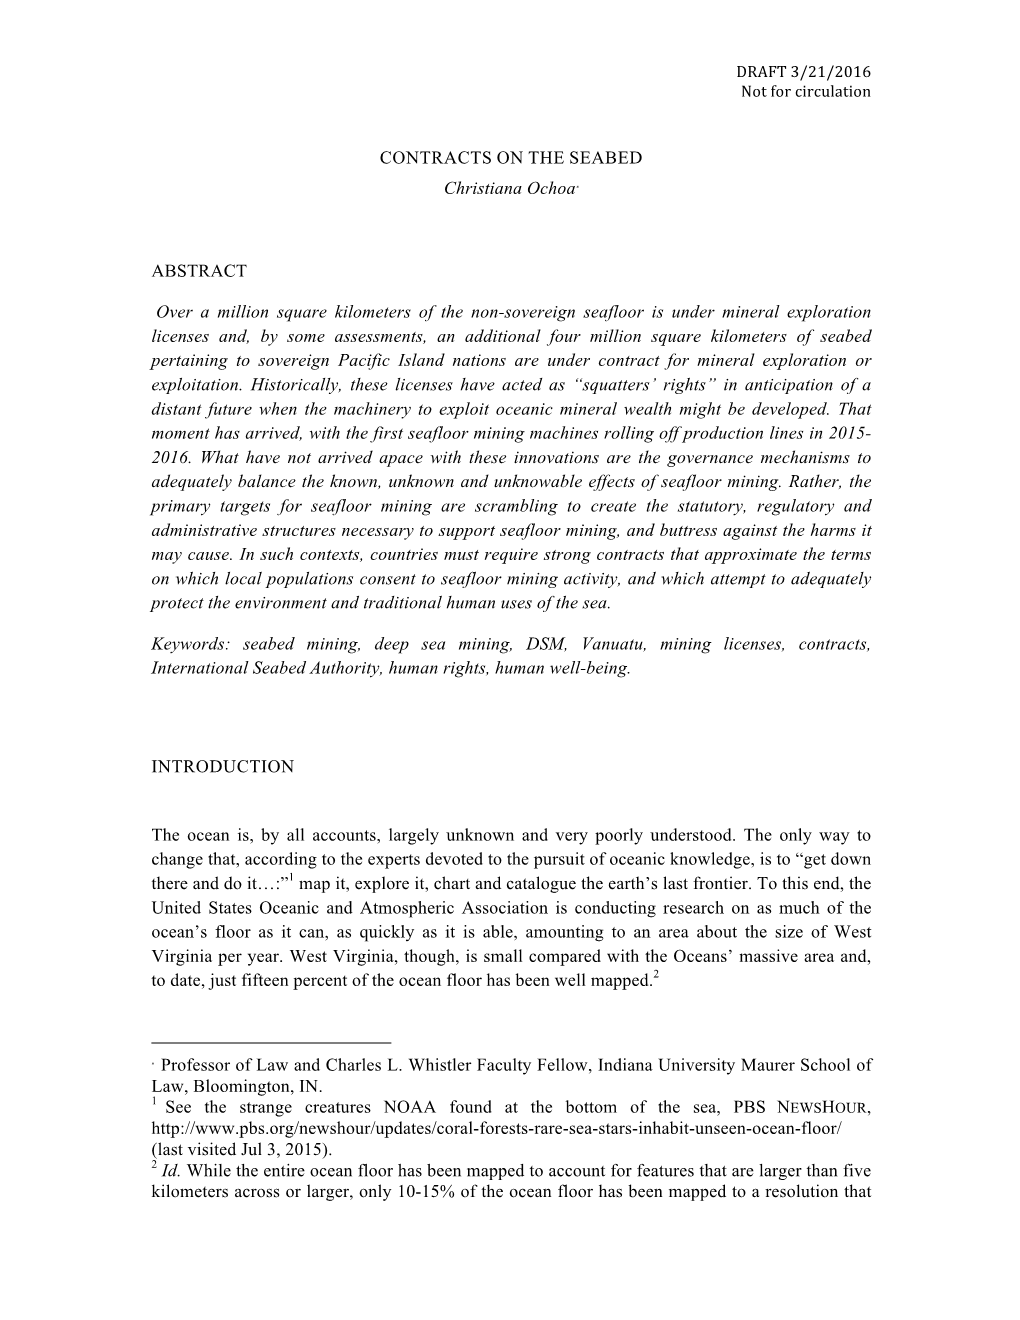 CONTRACTS on the SEABED Christiana Ochoa∗ ABSTRACT